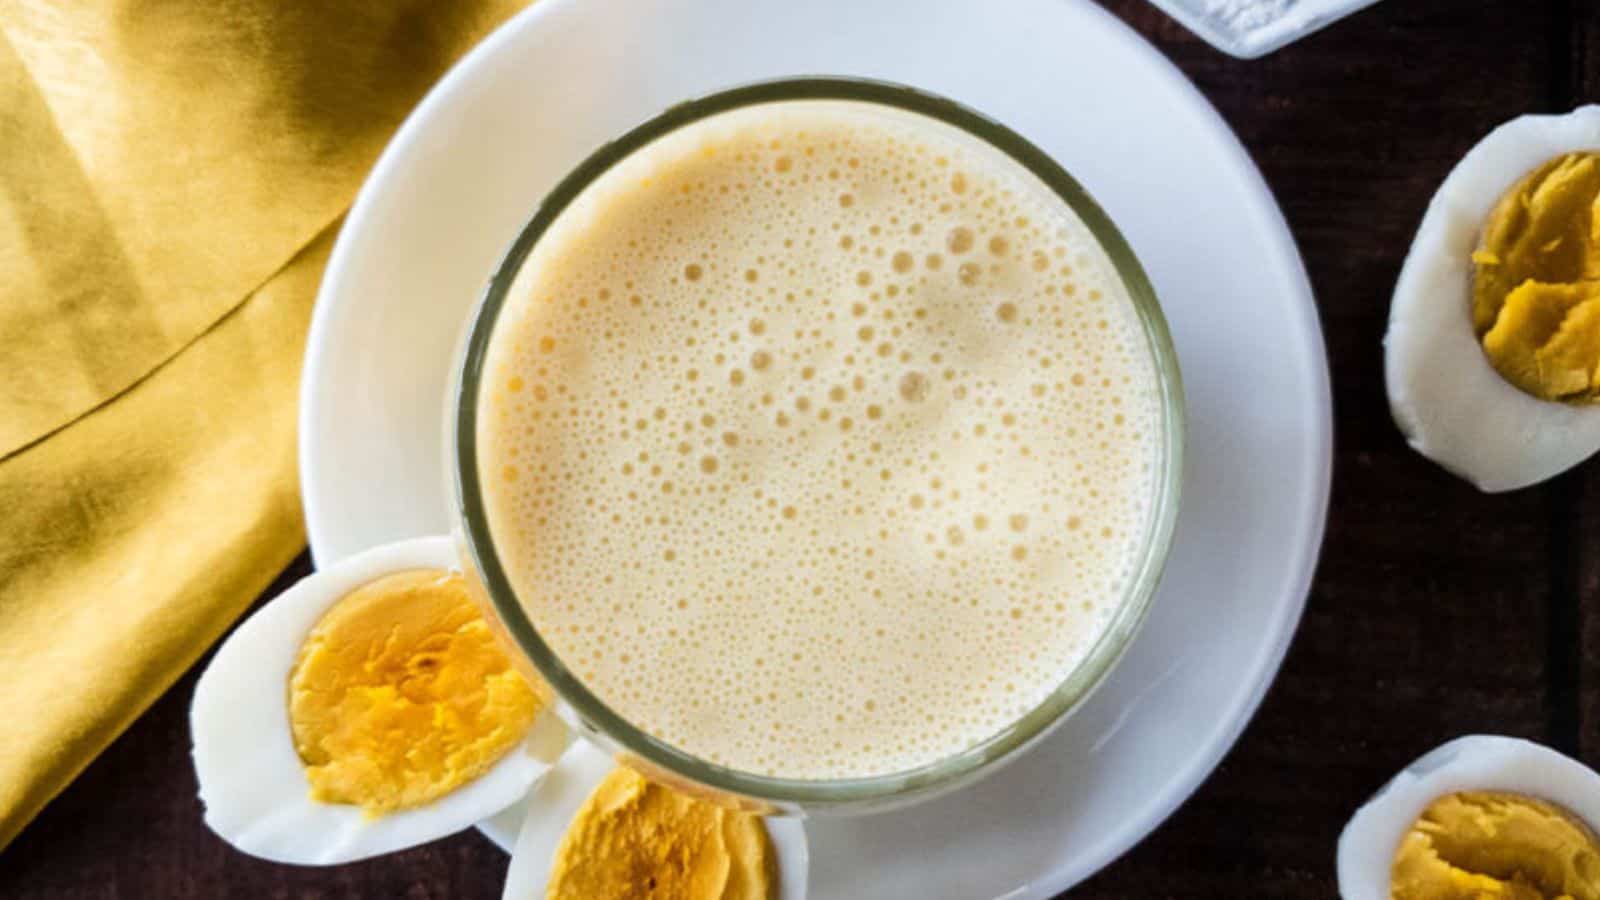 <p>Need a quick, nutritious boost? This High-Protein Smoothie is low-carb and takes no time at all to blend together. Great for breakfast or post-workout, it’s packed with flavor and nutrition. Perfect for on-the-go non-cooks – just blend and enjoy without any kitchen stress!<br><strong>Get the Recipe: </strong><a href="https://www.primaledgehealth.com/egg-smoothie/?utm_source=msn&utm_medium=page&utm_campaign=msn">High-Protein Smoothie</a></p>